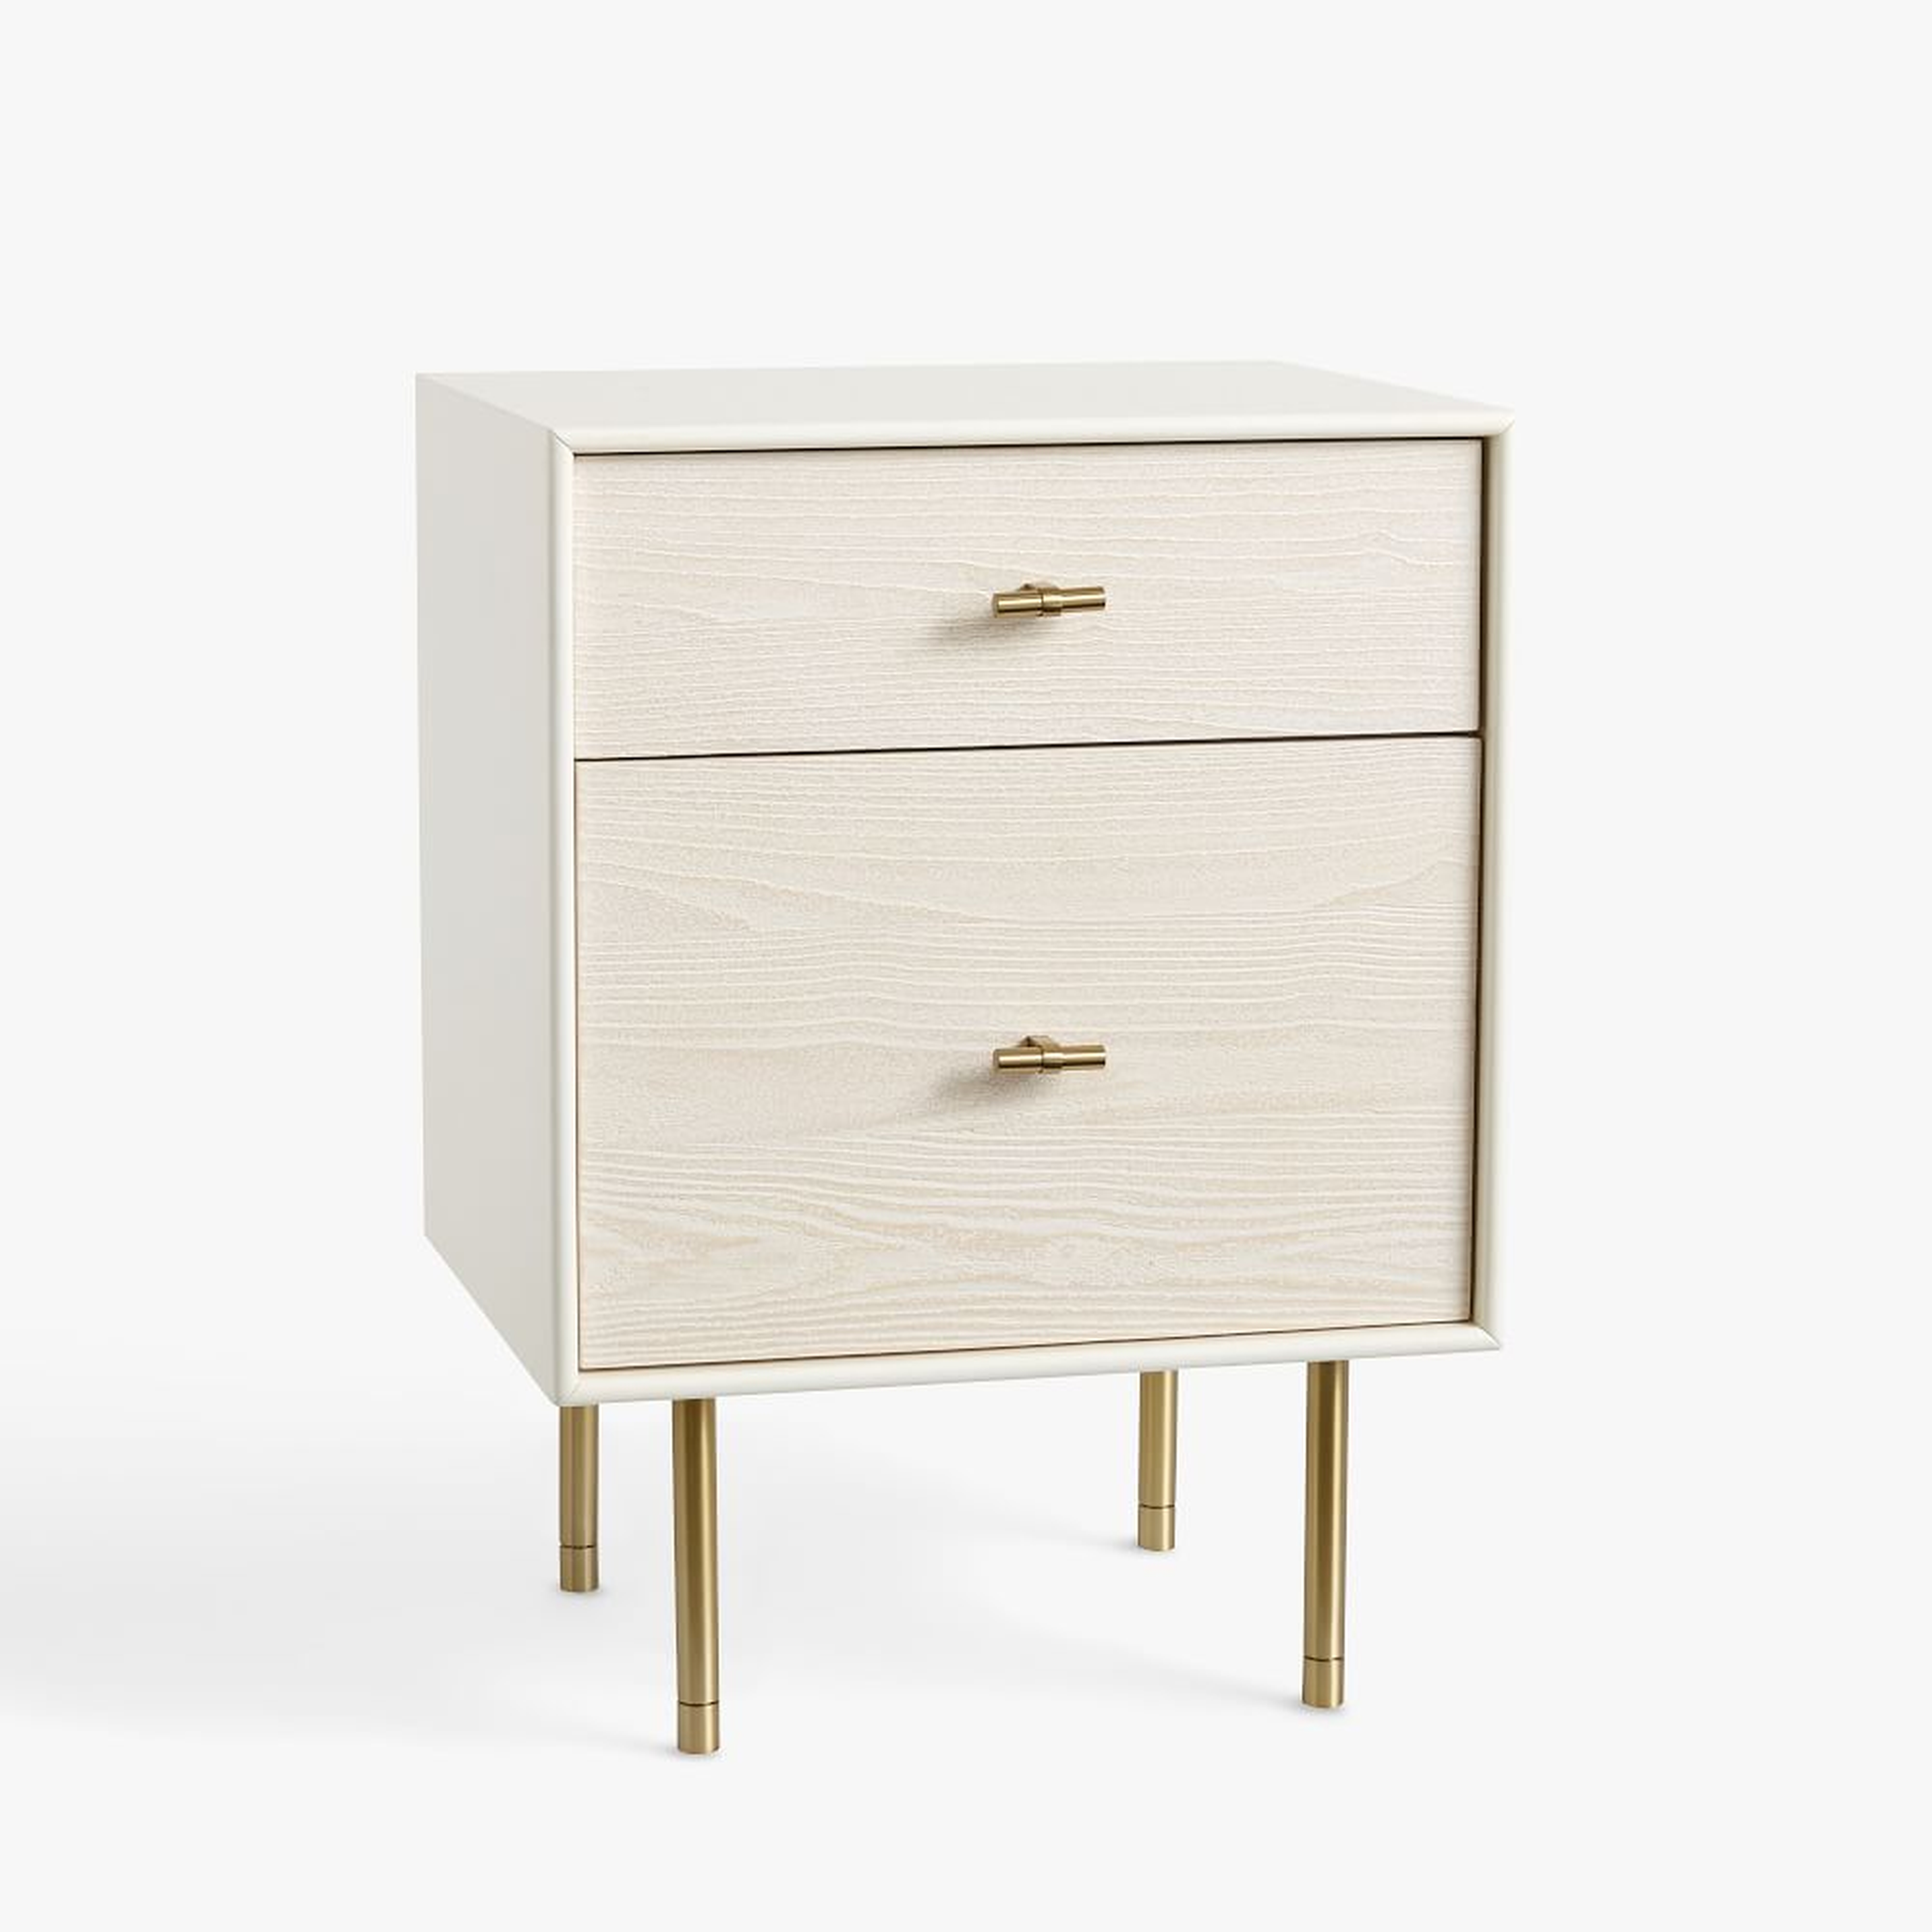 Modernist Bedside Nightstand, White and Wintered Wood, WE Kids - West Elm